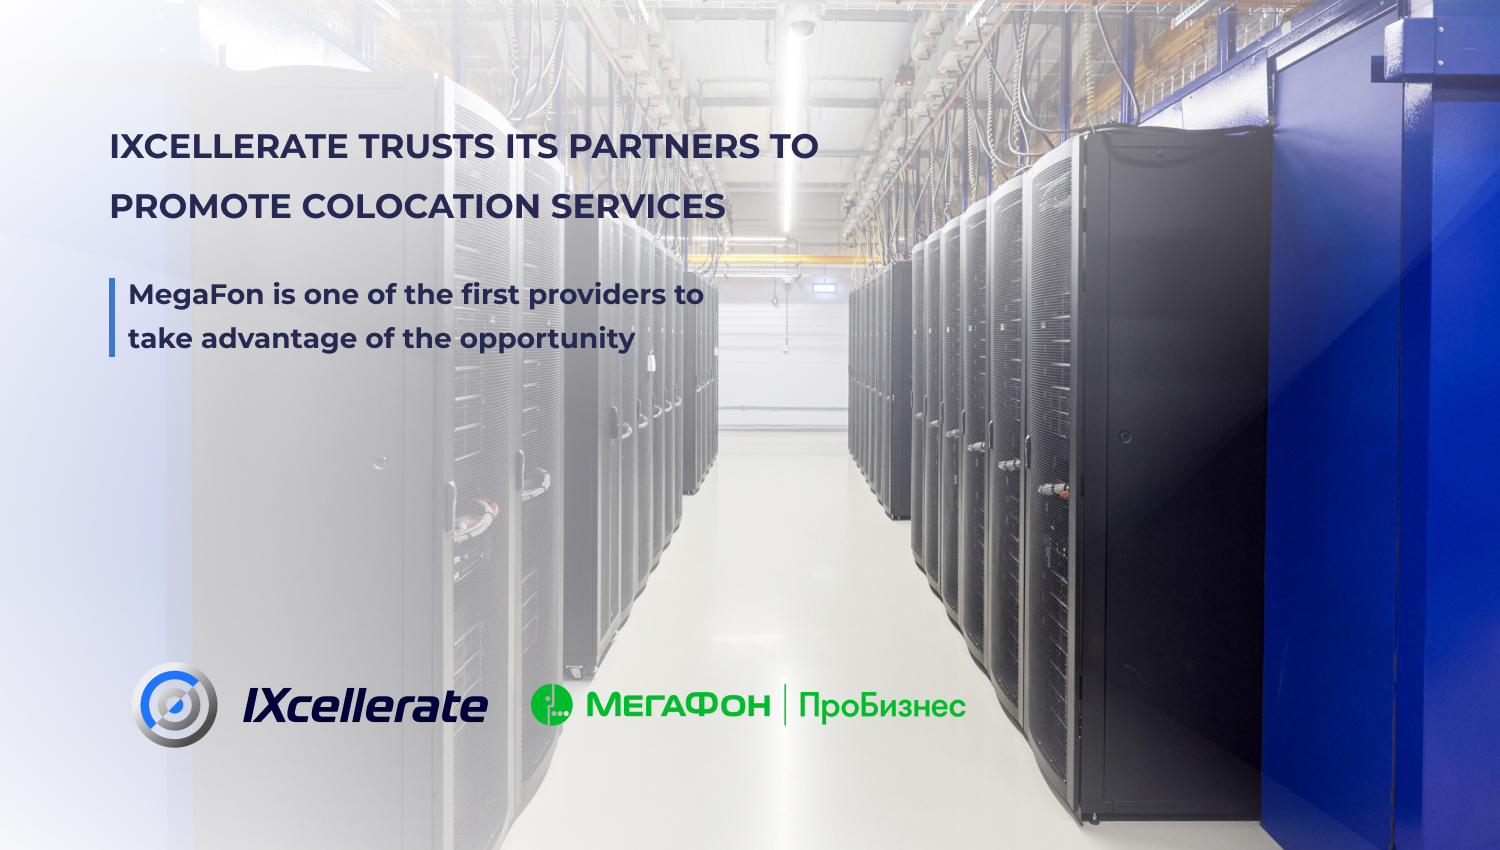 ixcellerate trusts its partners to promote colocation services